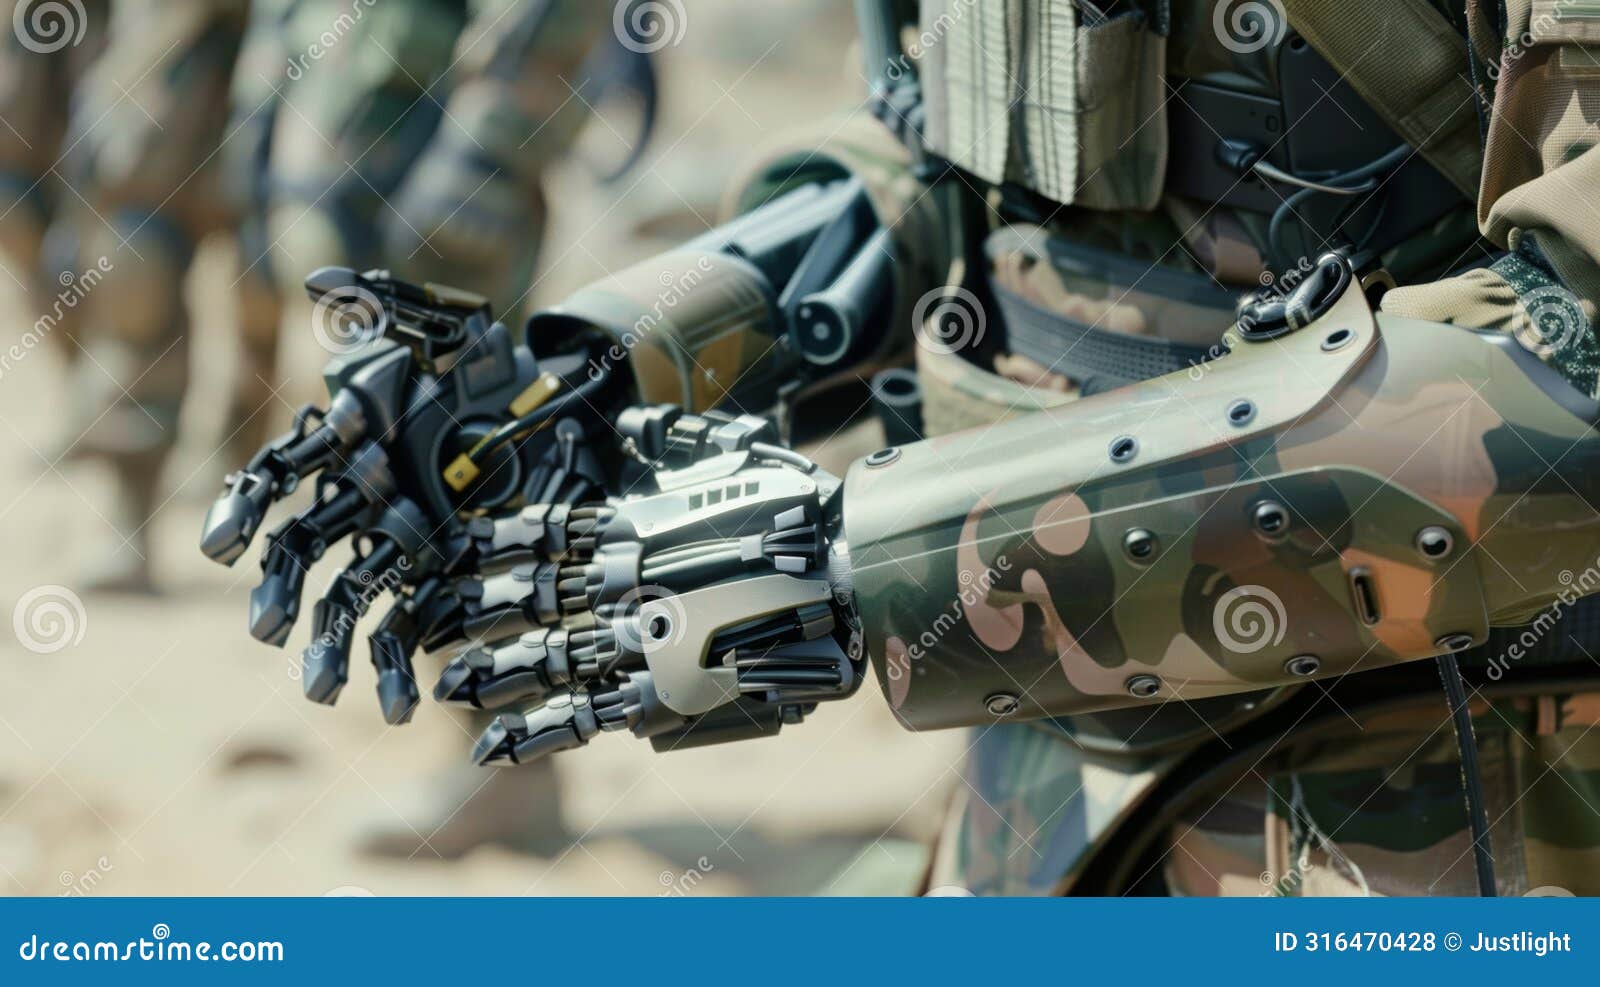 a soldier with a prosthetic arm uses his neuroprosthetic hand to safely handle explosives giving him back the skills